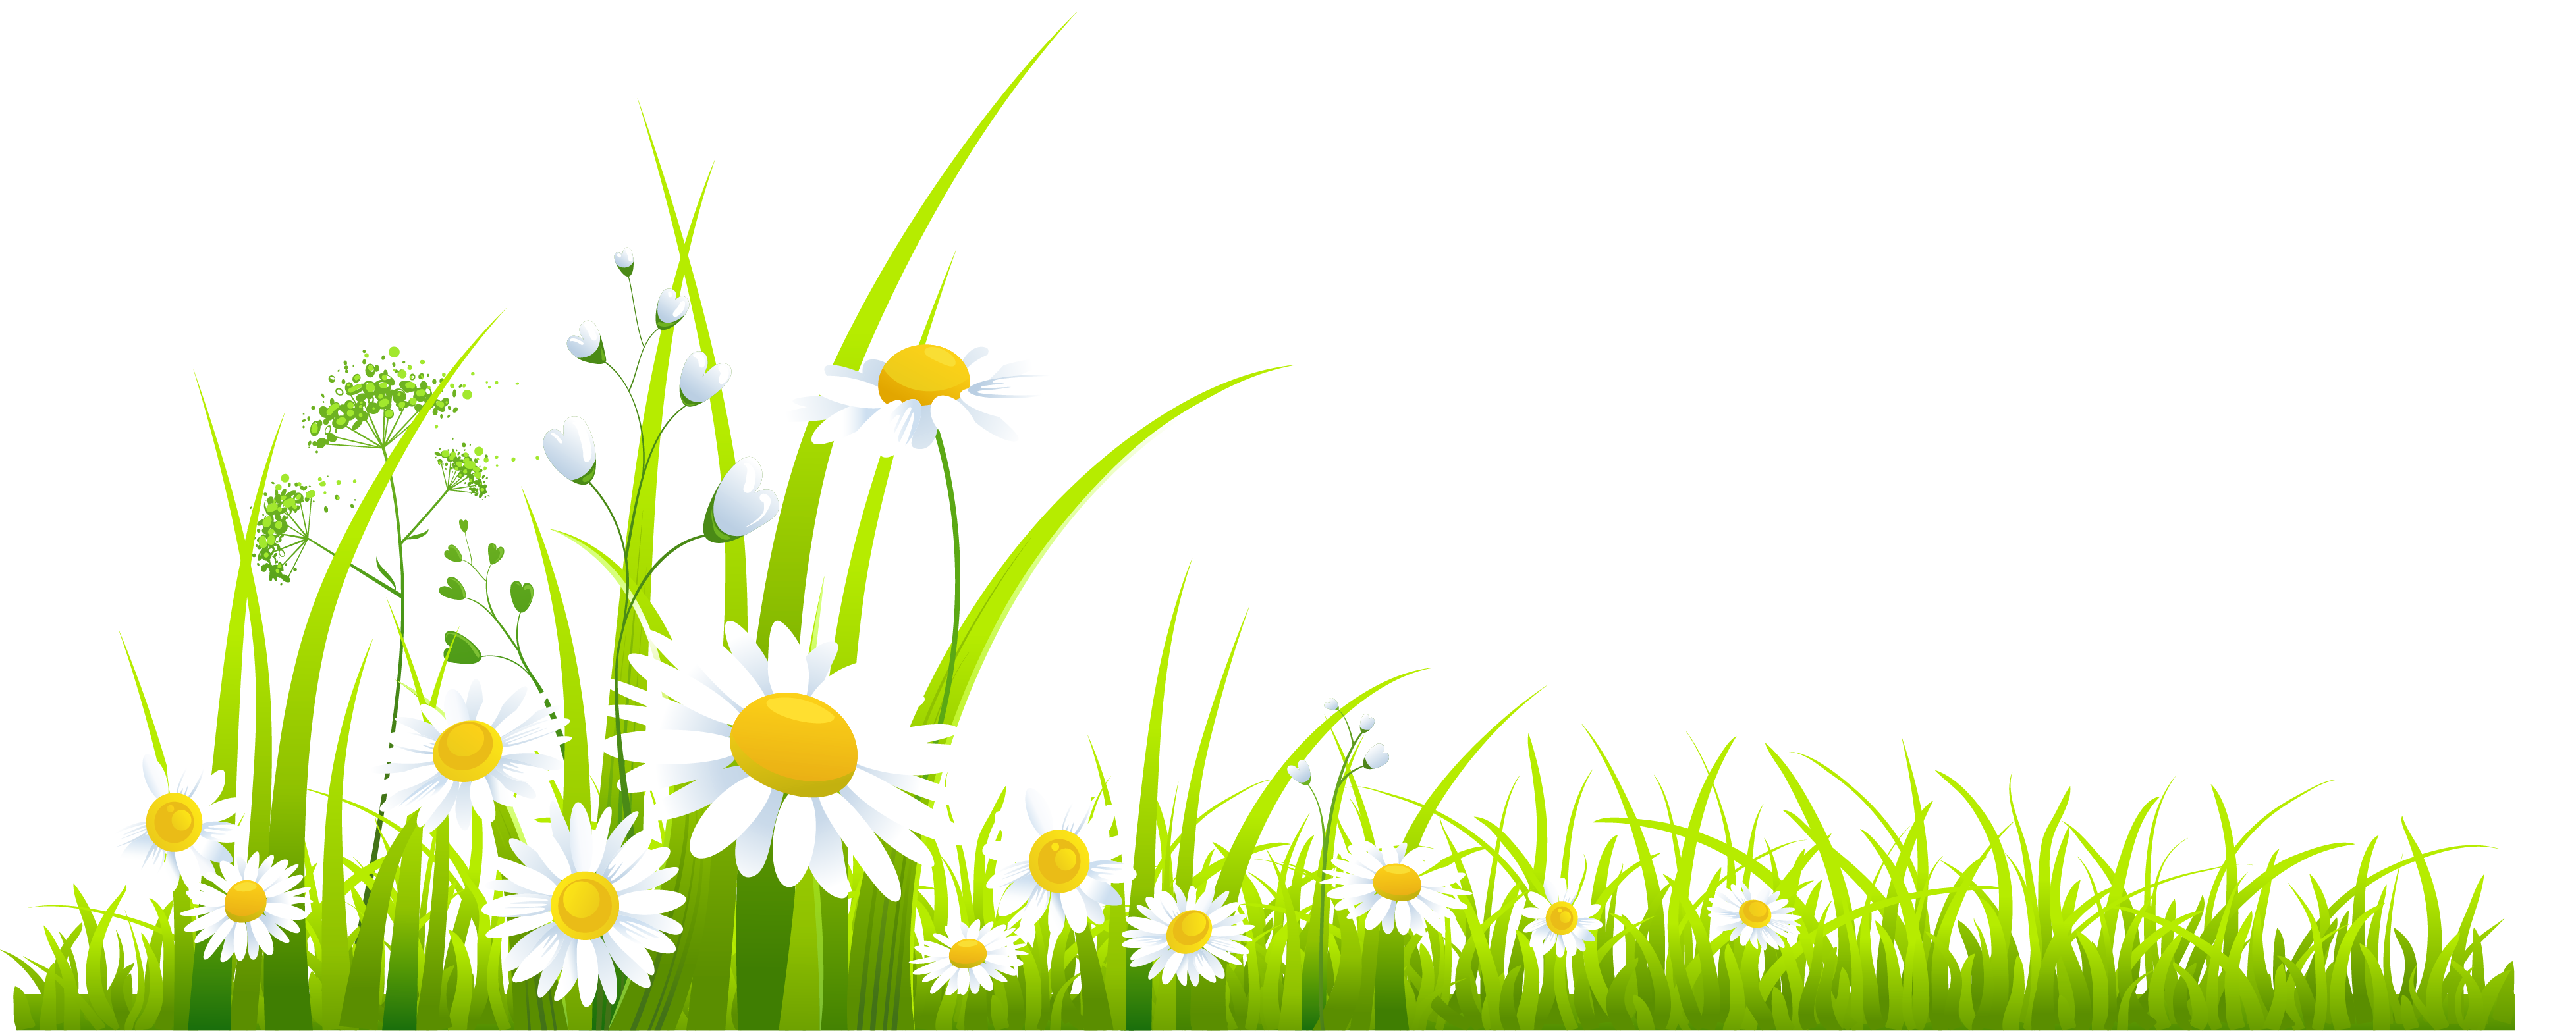 Spring clipart on free clipart clipart image 